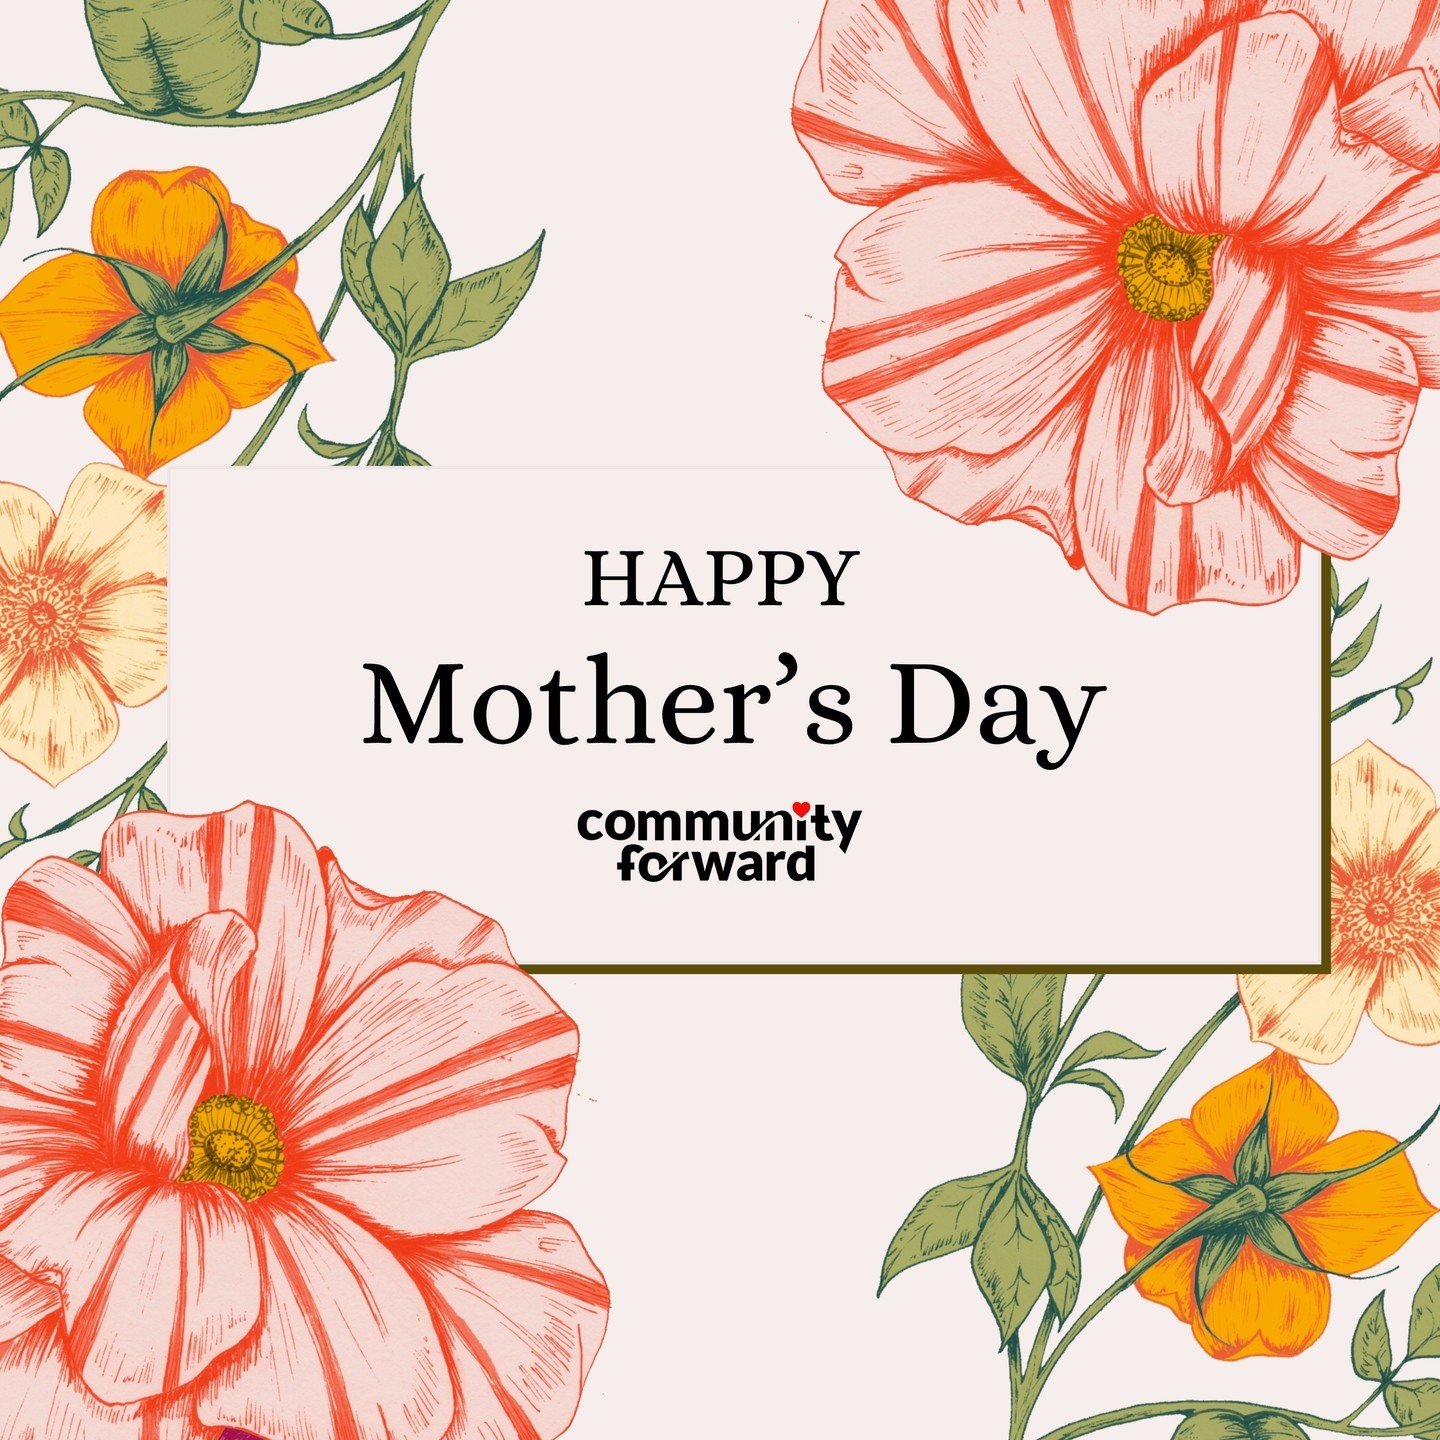 Happy Mother's Day to all the incredible moms, maternal figures, supporters and caregivers in our lives! Today, we send our praise, recognition, and gratitude for all that you do.